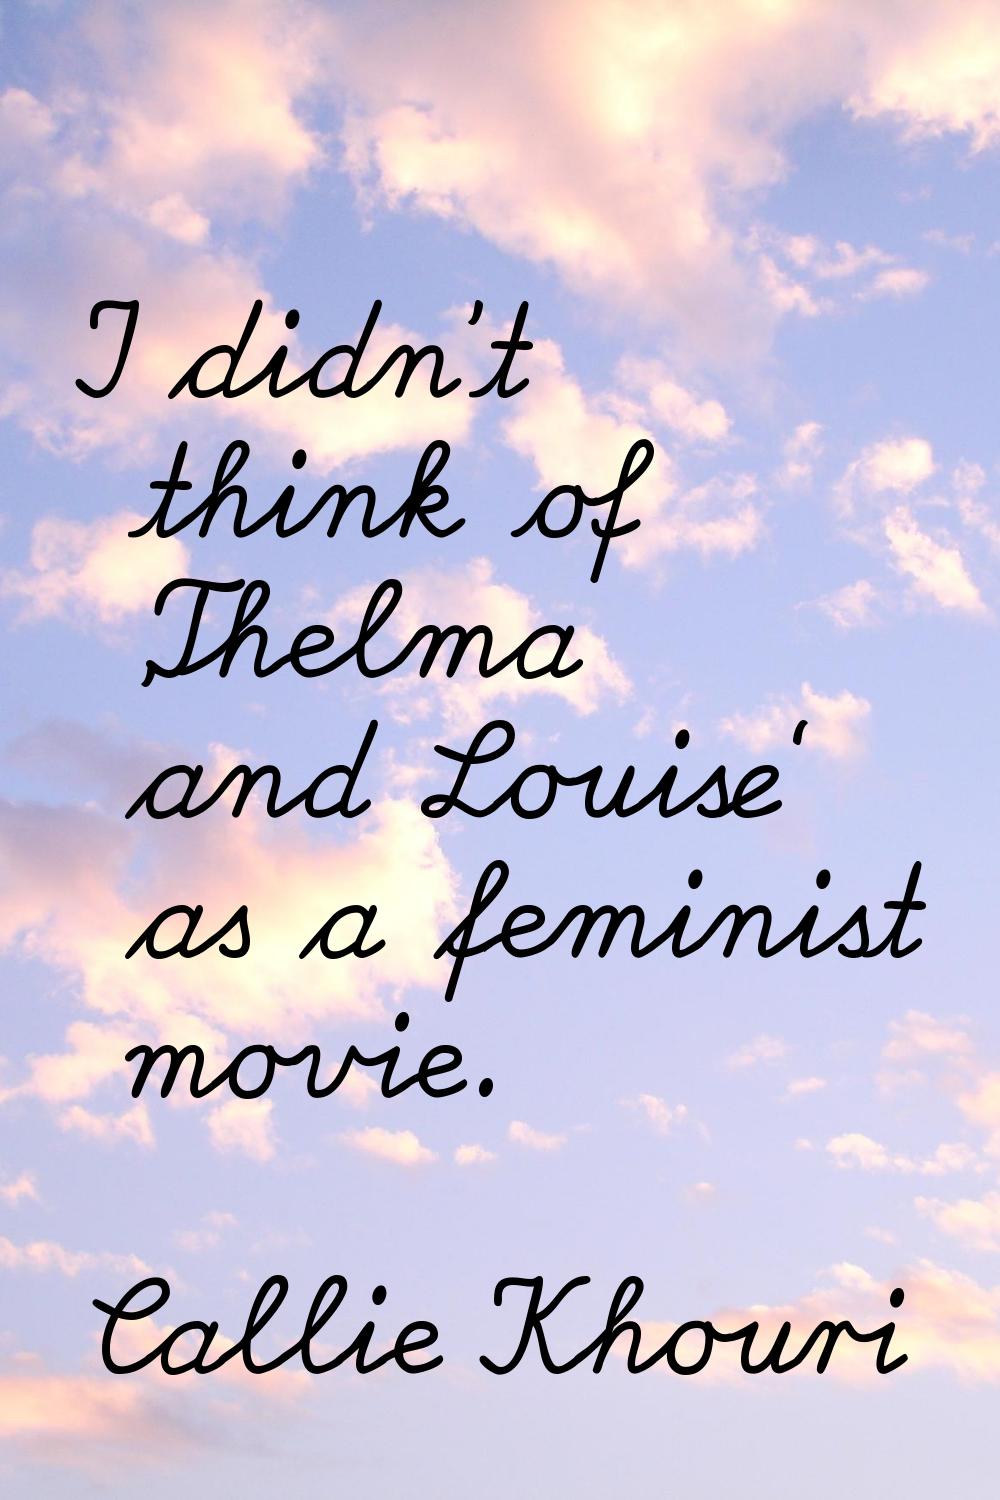 I didn't think of 'Thelma and Louise' as a feminist movie.